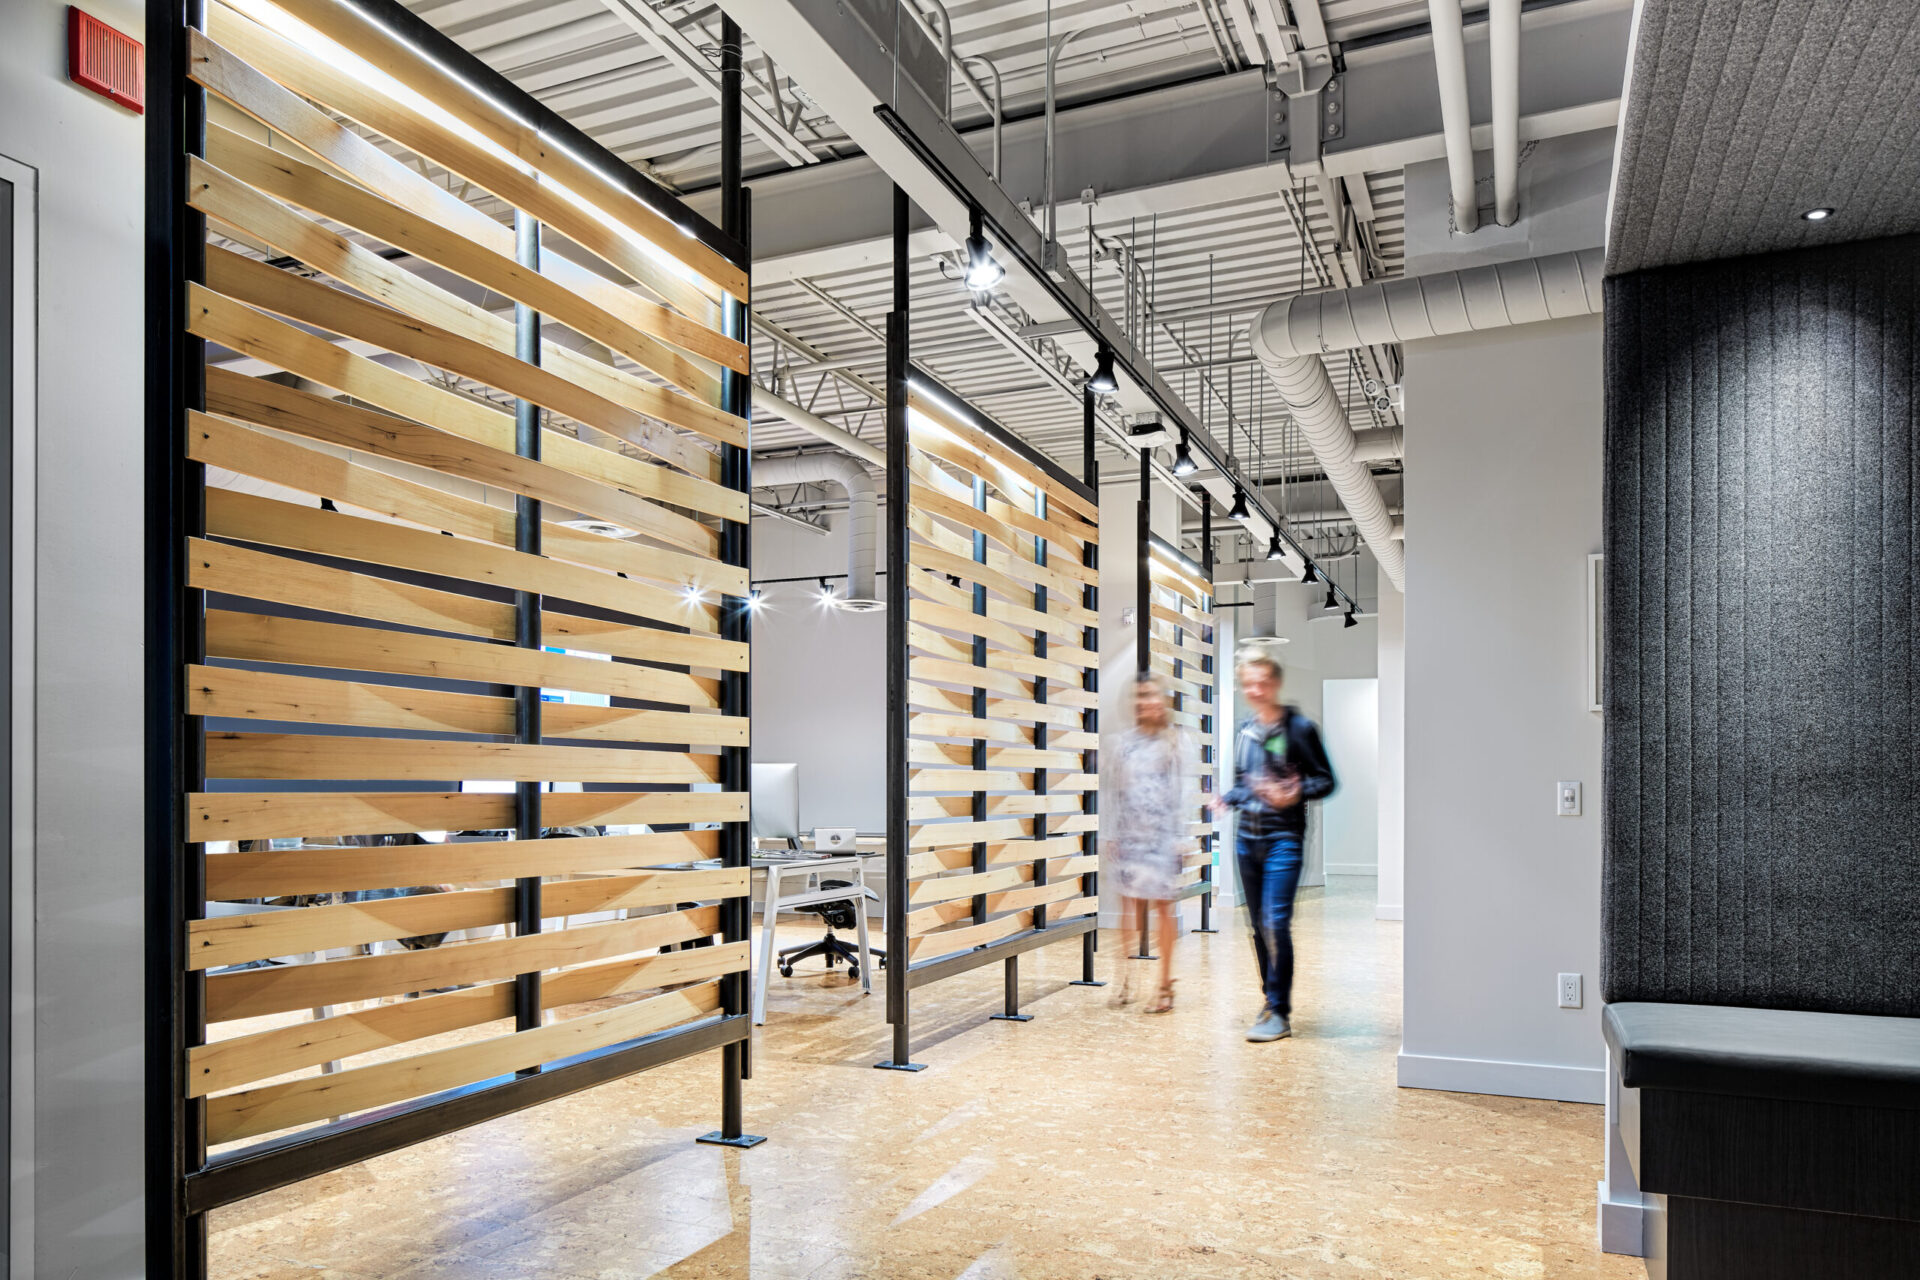 An architecturally designed office with wooden slats in the hallway.